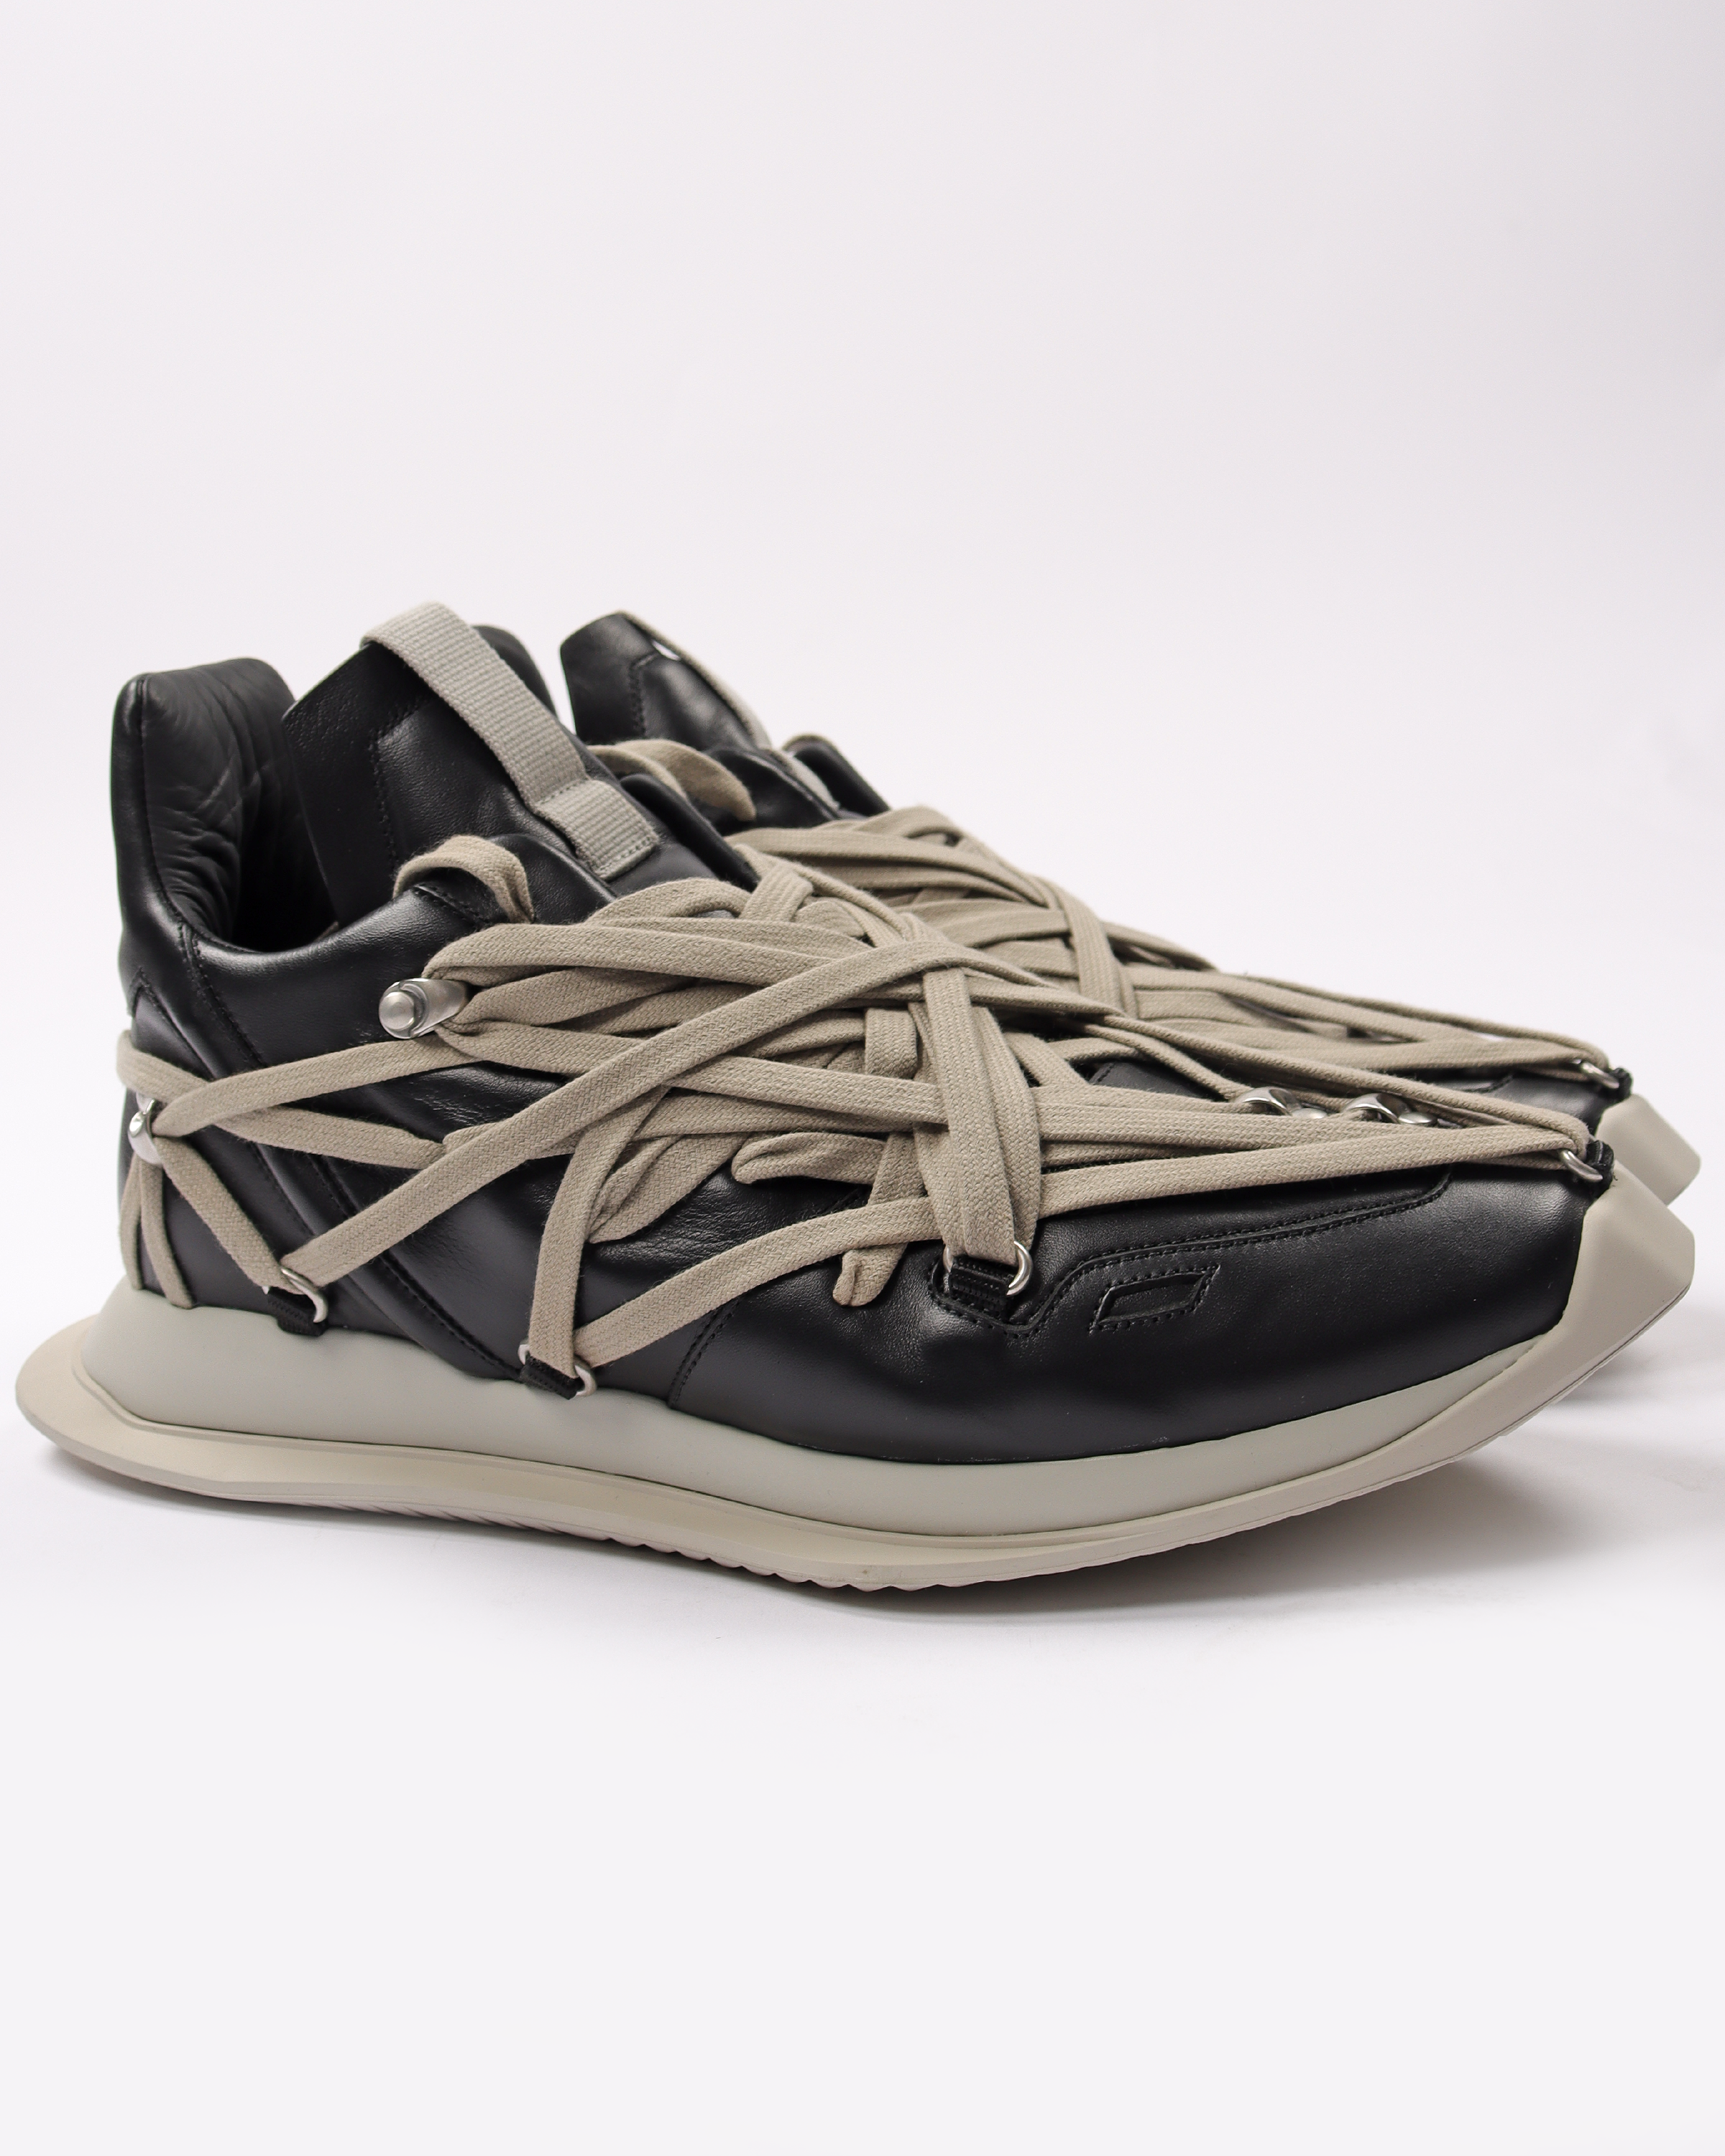 Rick Owens Megalaced Runner Sneakers